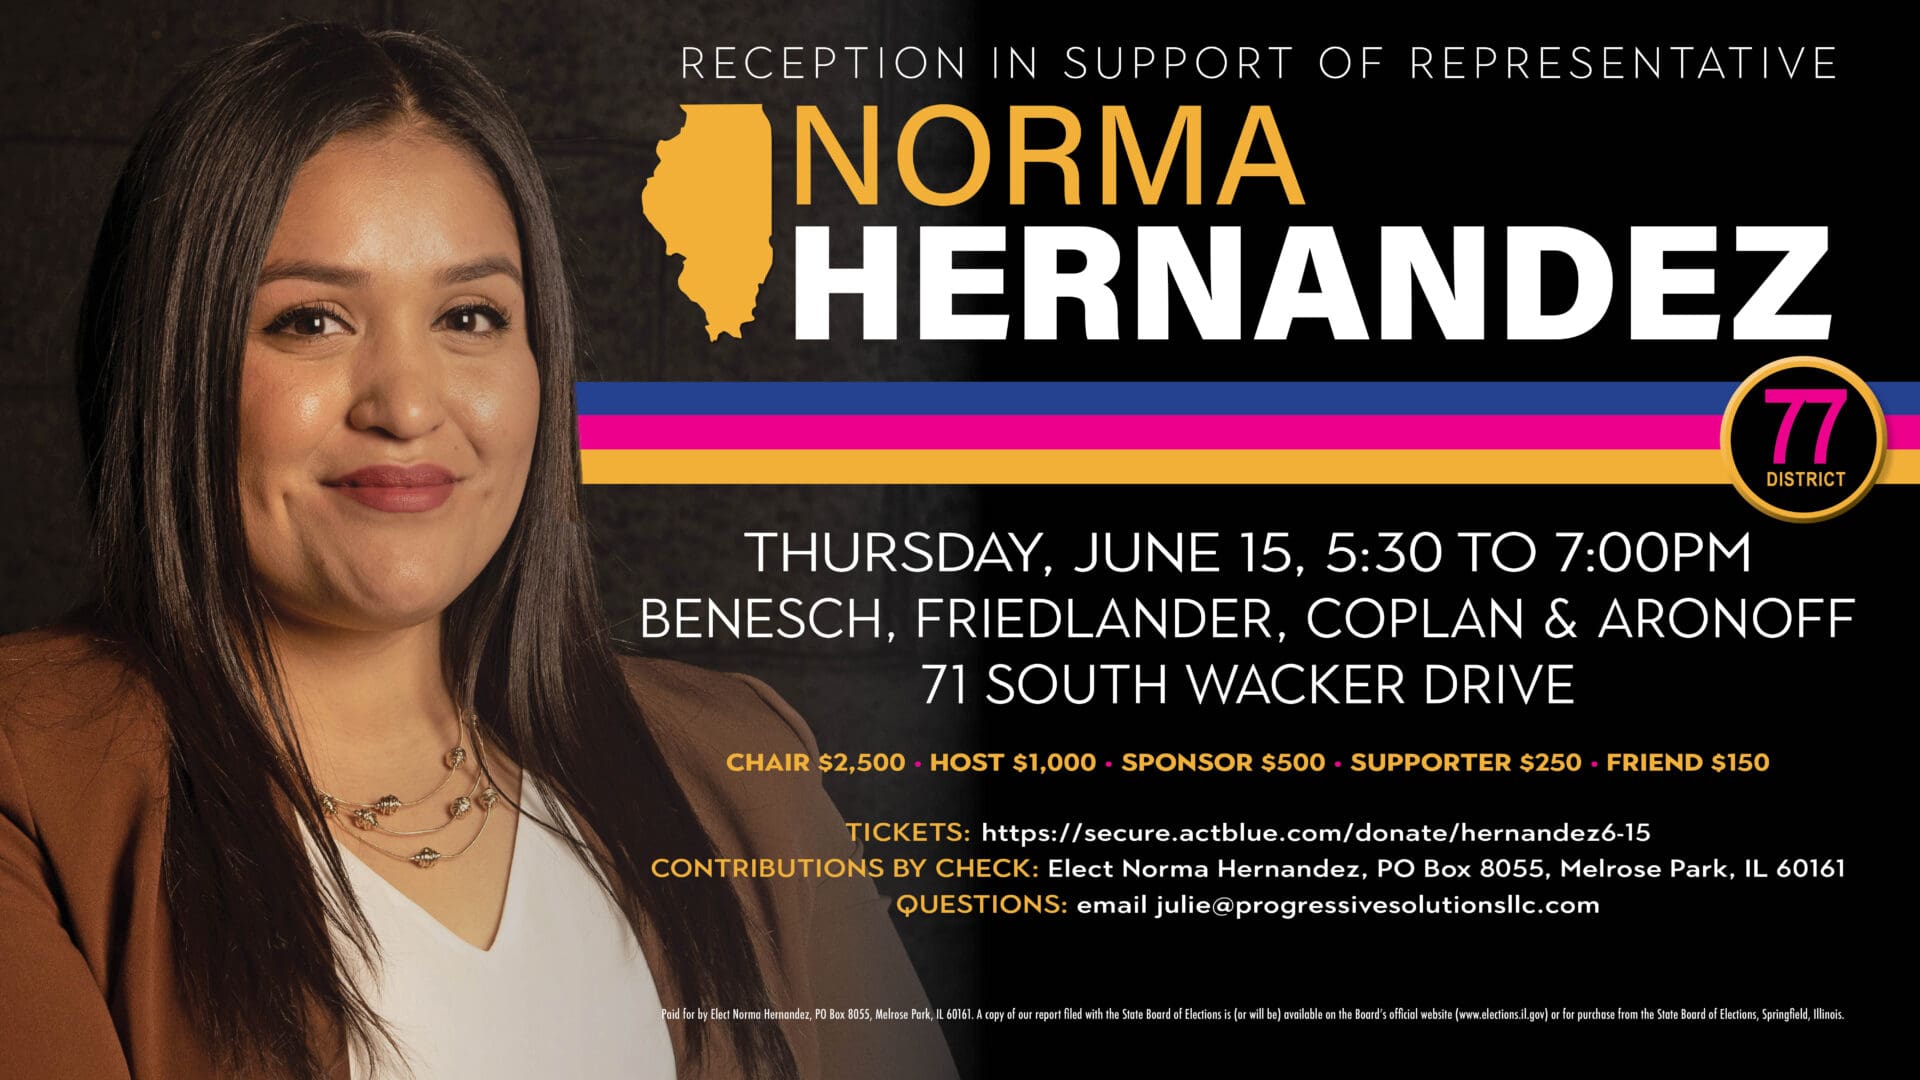 et's keep a strong advocate for working families working for us in Springfield! Join Rep. Norma Hernandez next Thursday for a fundraiser reception. Purchase tickets today.